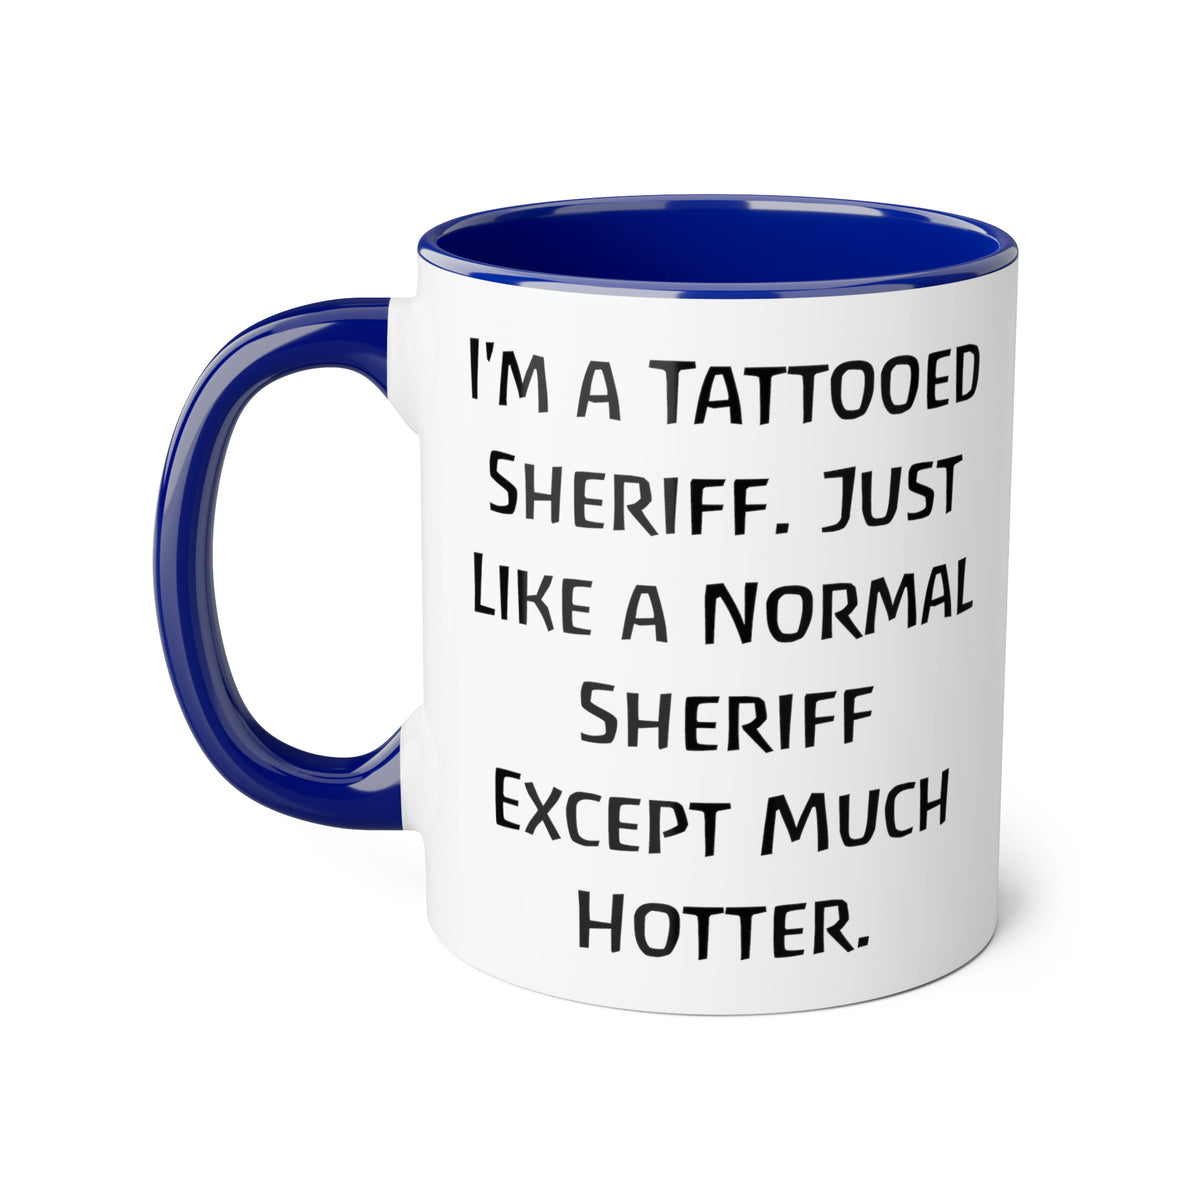 Unique Sheriff Gifts, I'm a Tattooed Sheriff. Just Like a Normal, Birthday Unique Gifts, Two Tone 11oz Mug For Sheriff from Boss, Sheriff Appreciation Gifts